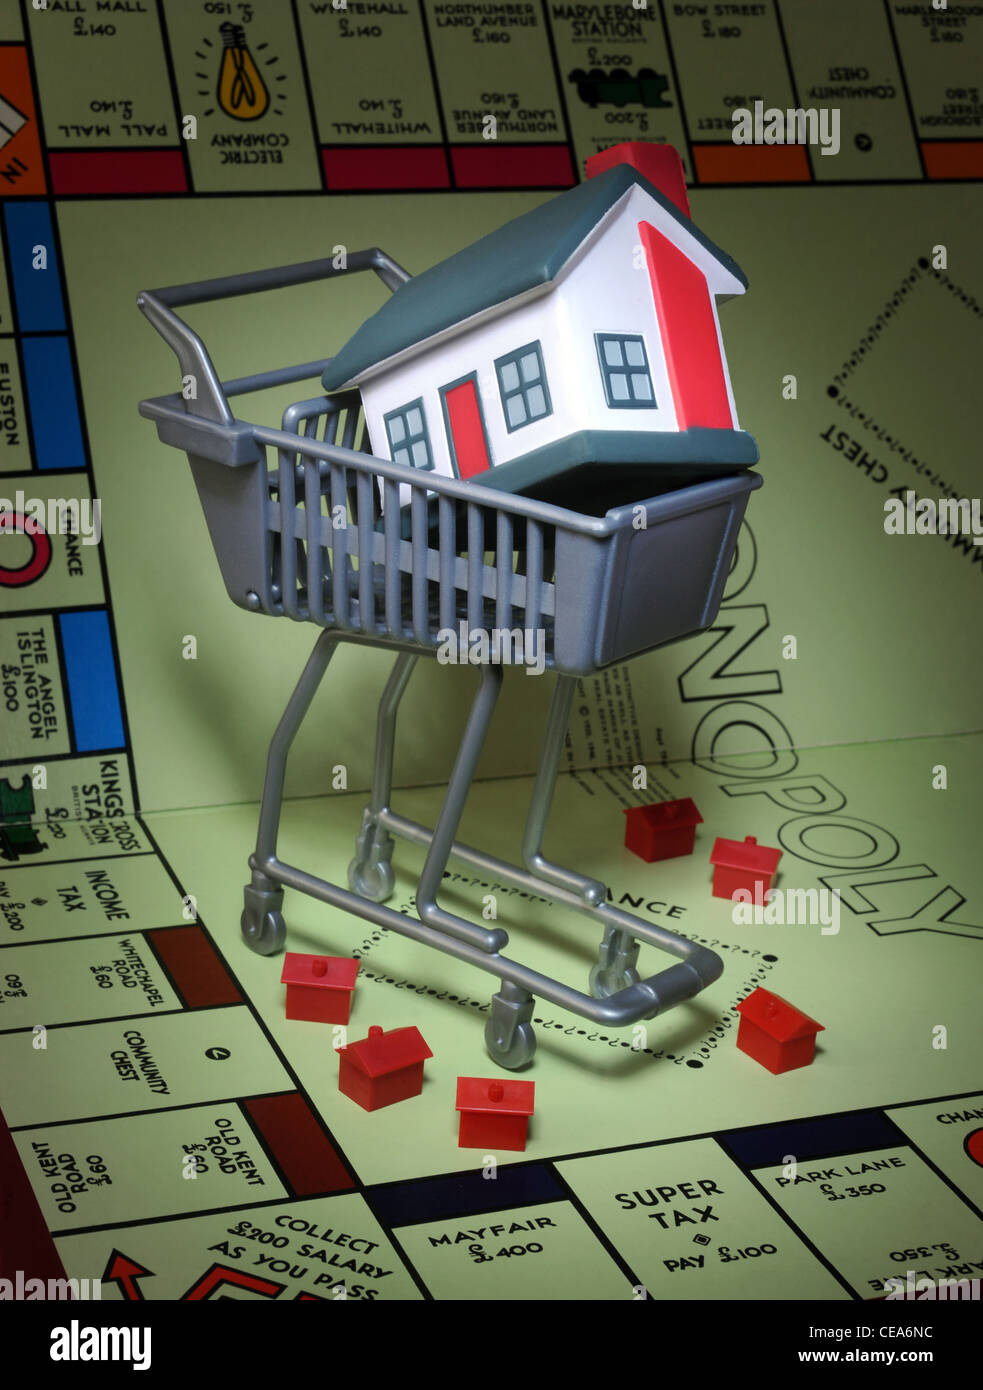 MODEL HOUSES ON MONOPOLY GAME BOARD WITH SUPERMARKET SHOPPING TROLLEY  RE HOUSE BUYERS BUYING PROPERTY MARKET PRICES HOMES UK Stock Photo